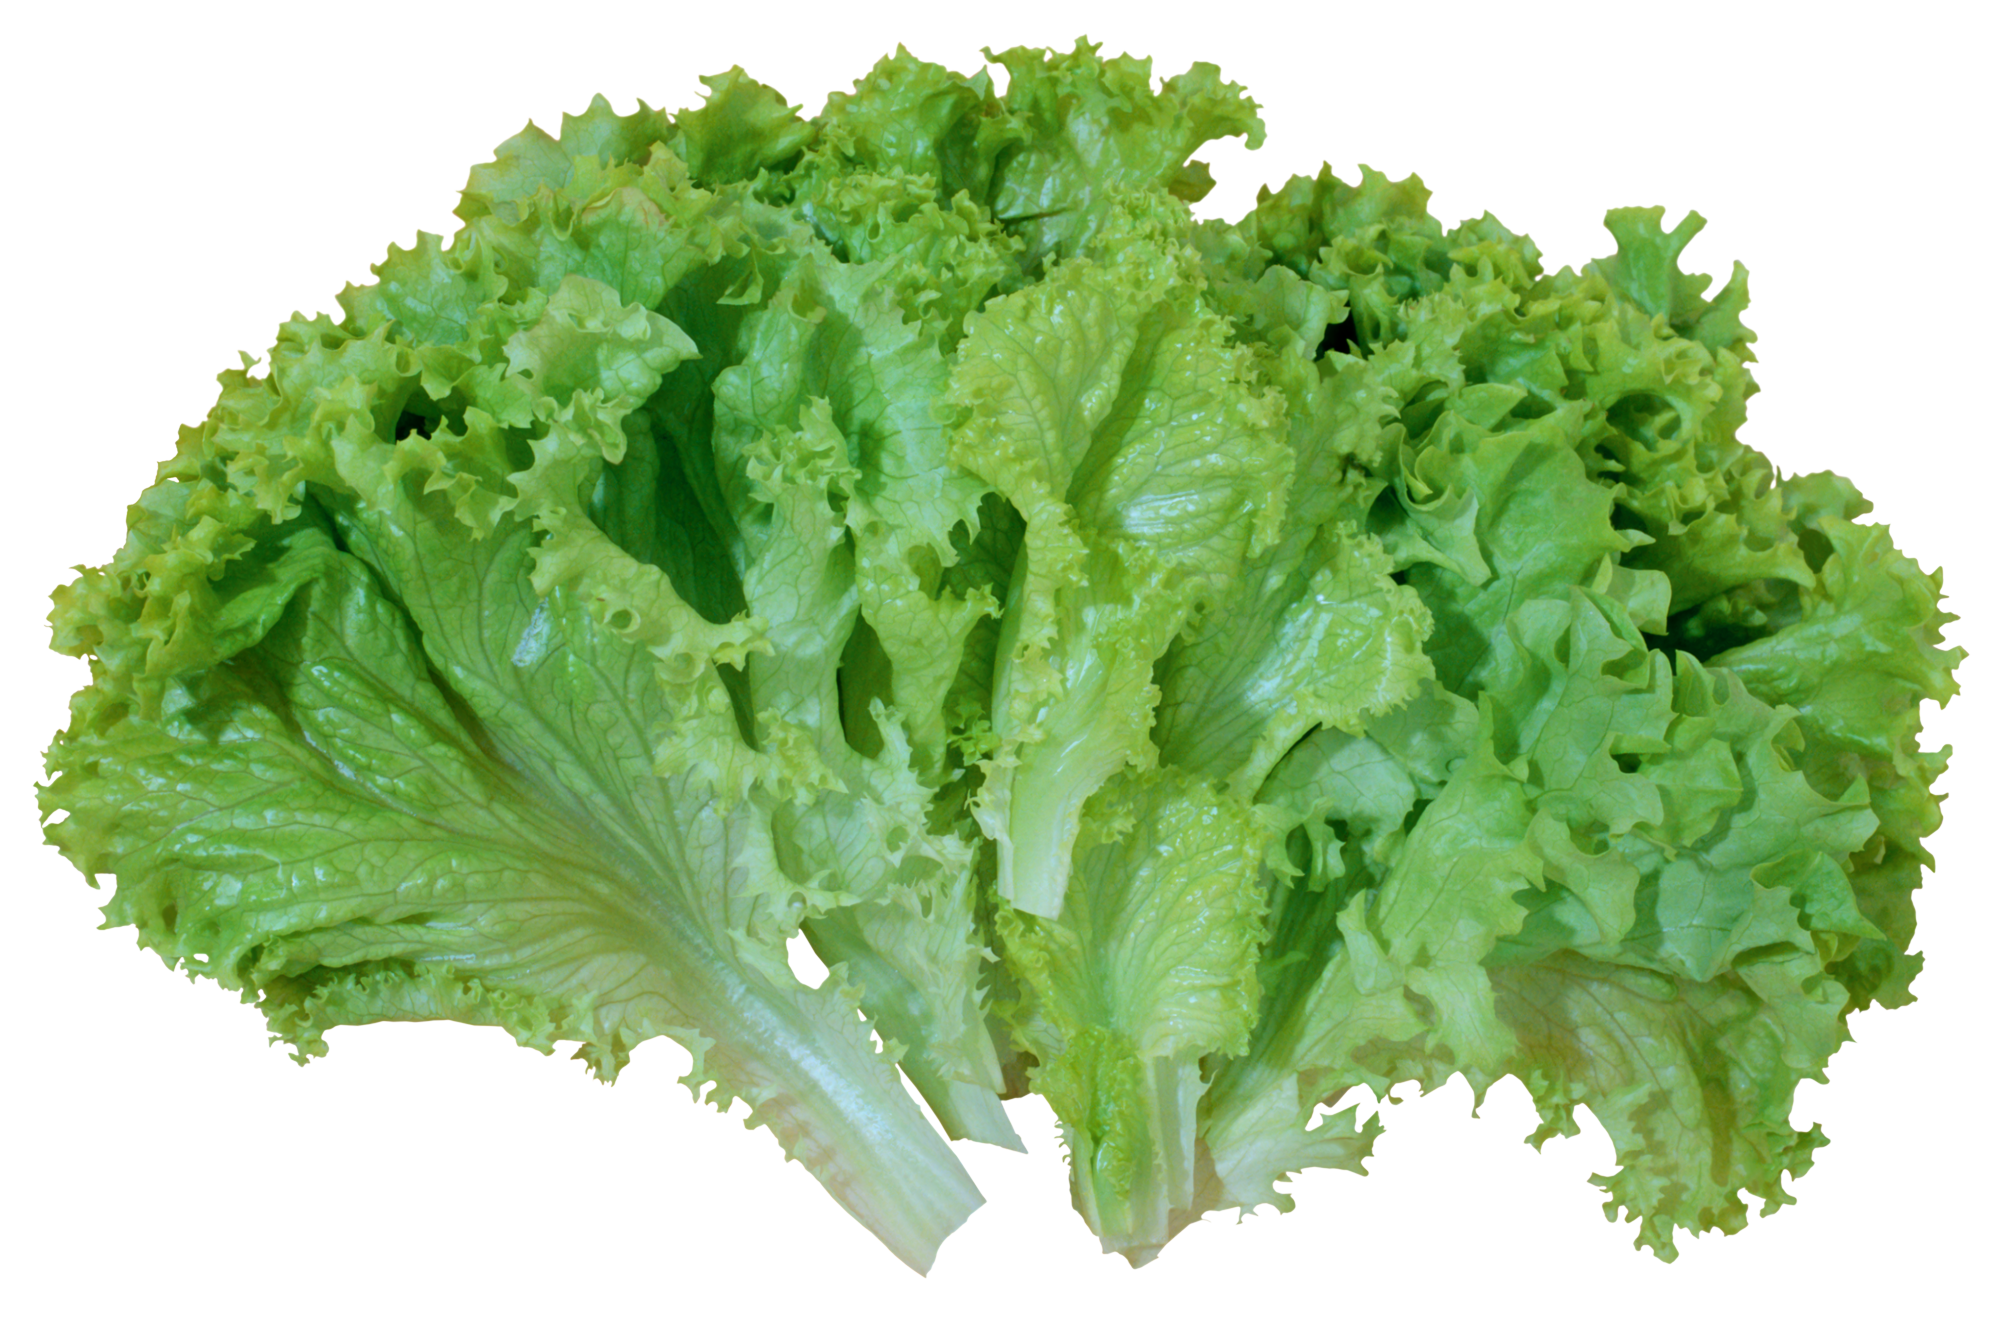 Green Salad Lettuce PNG Picture